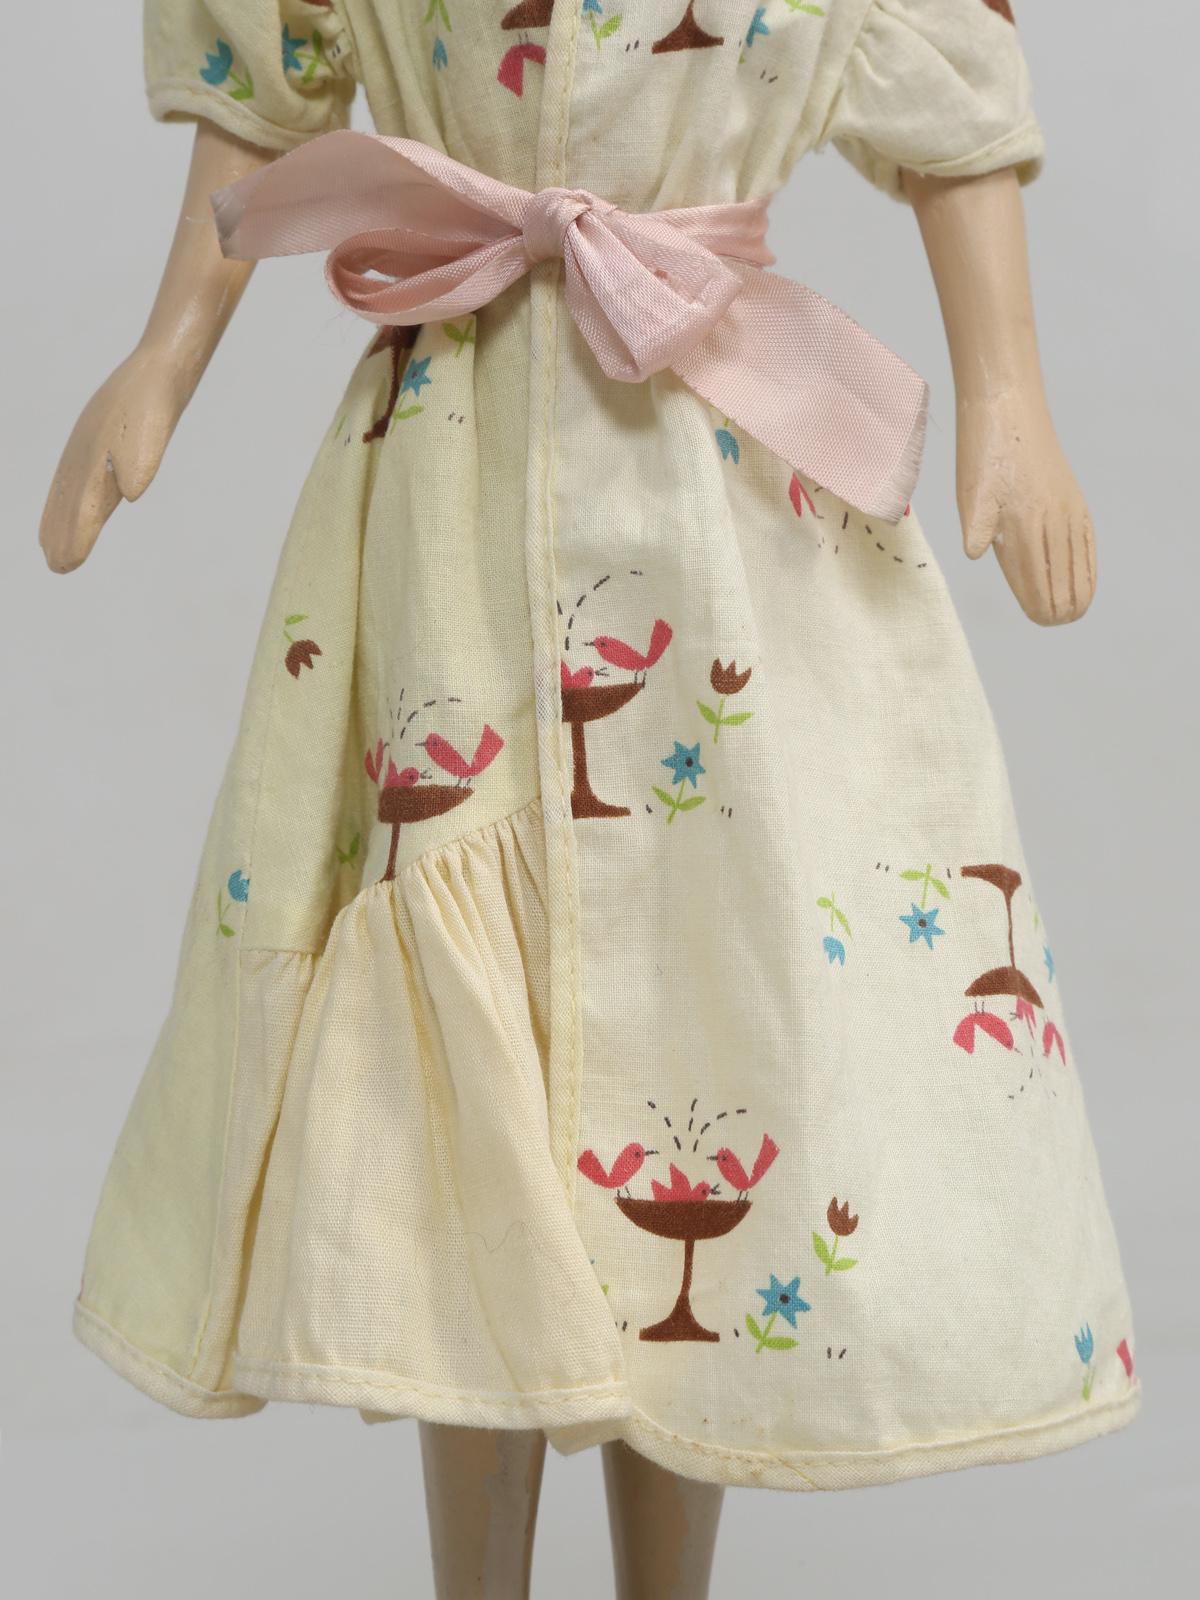 Mid-20th Century Miniature Department Store Mannequin, Used on a Display Counter